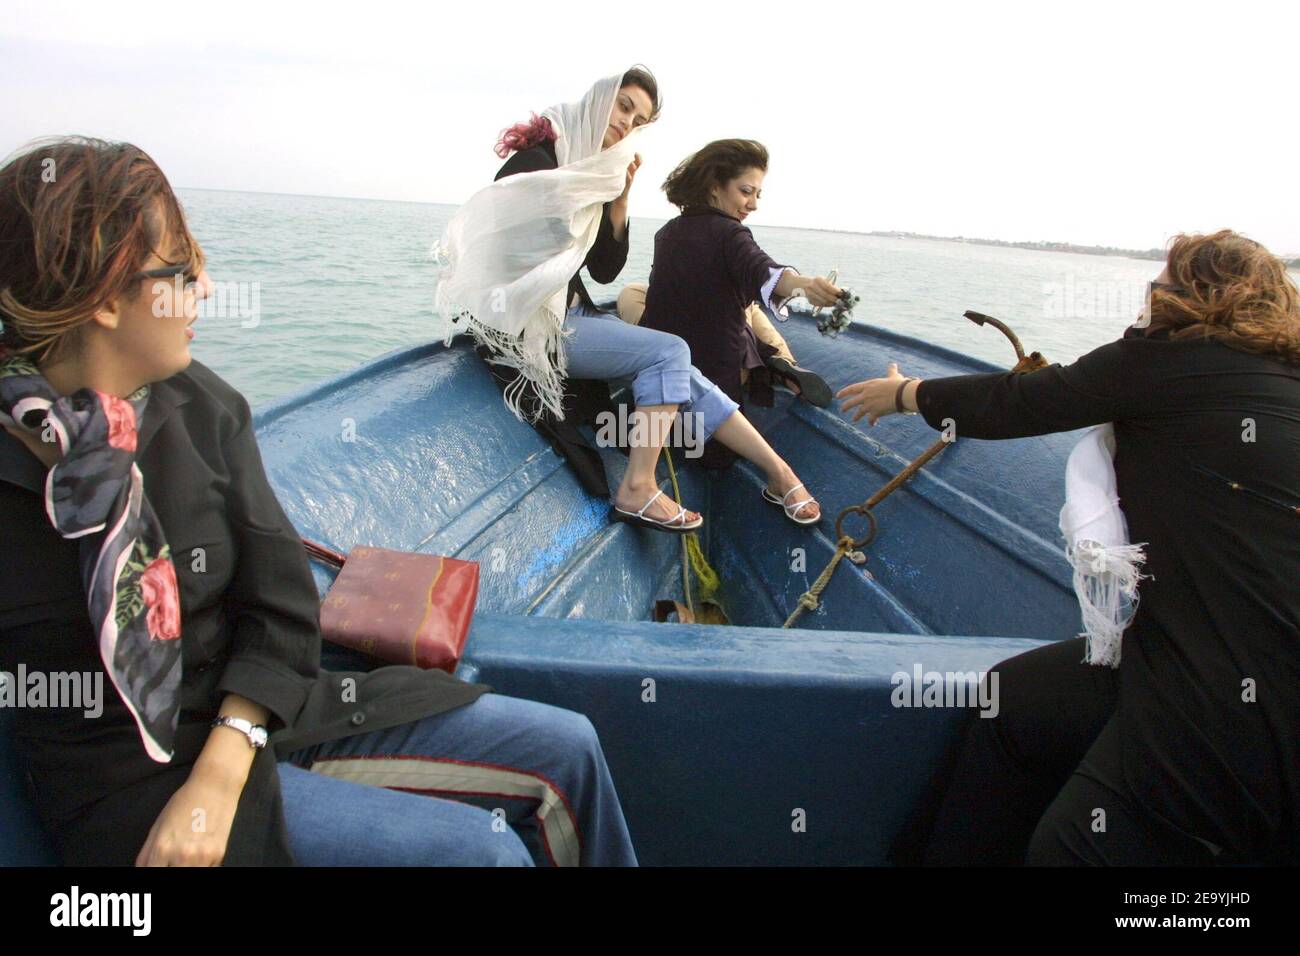 Young girls from Tabriz on a sea trip off Iran's island Kish, in the Persian Gulf, in April 2004. Photo by Orand-Viala/ABACA. Stock Photo